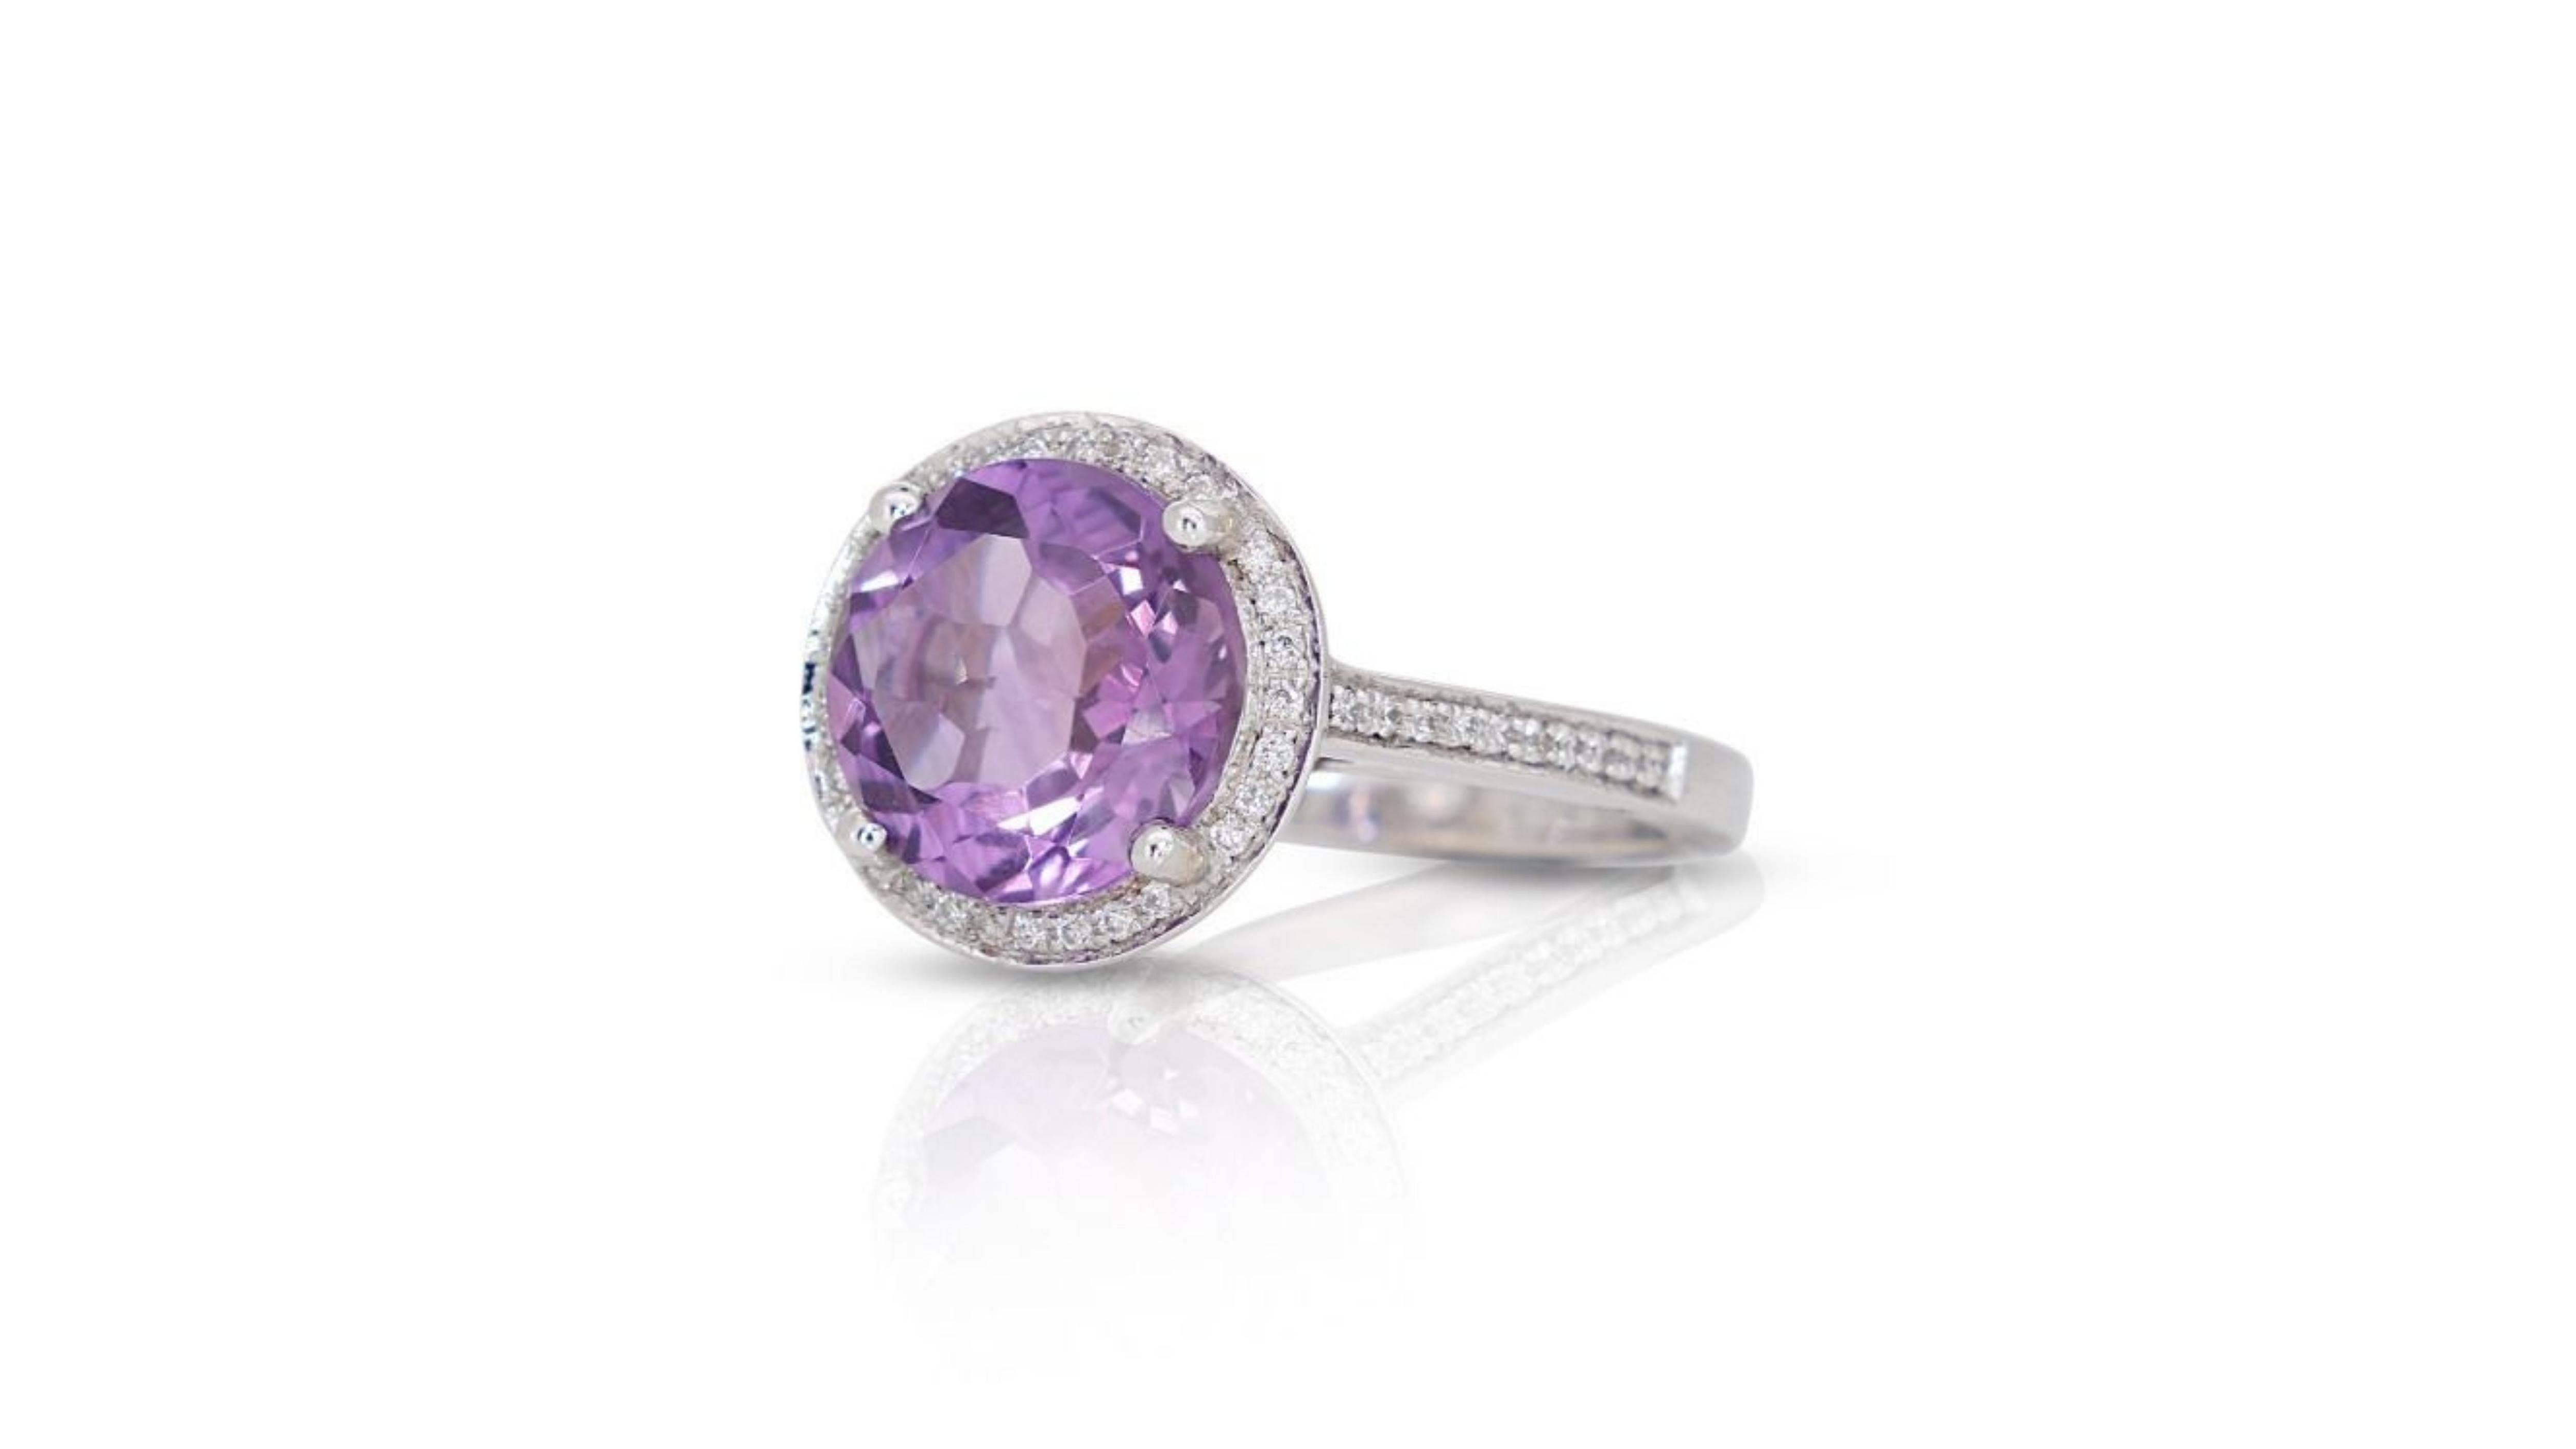 Women's Glamorous 18k White Gold Ring 3.52ct. Round Brilliant Pave Amethyst Ring For Sale